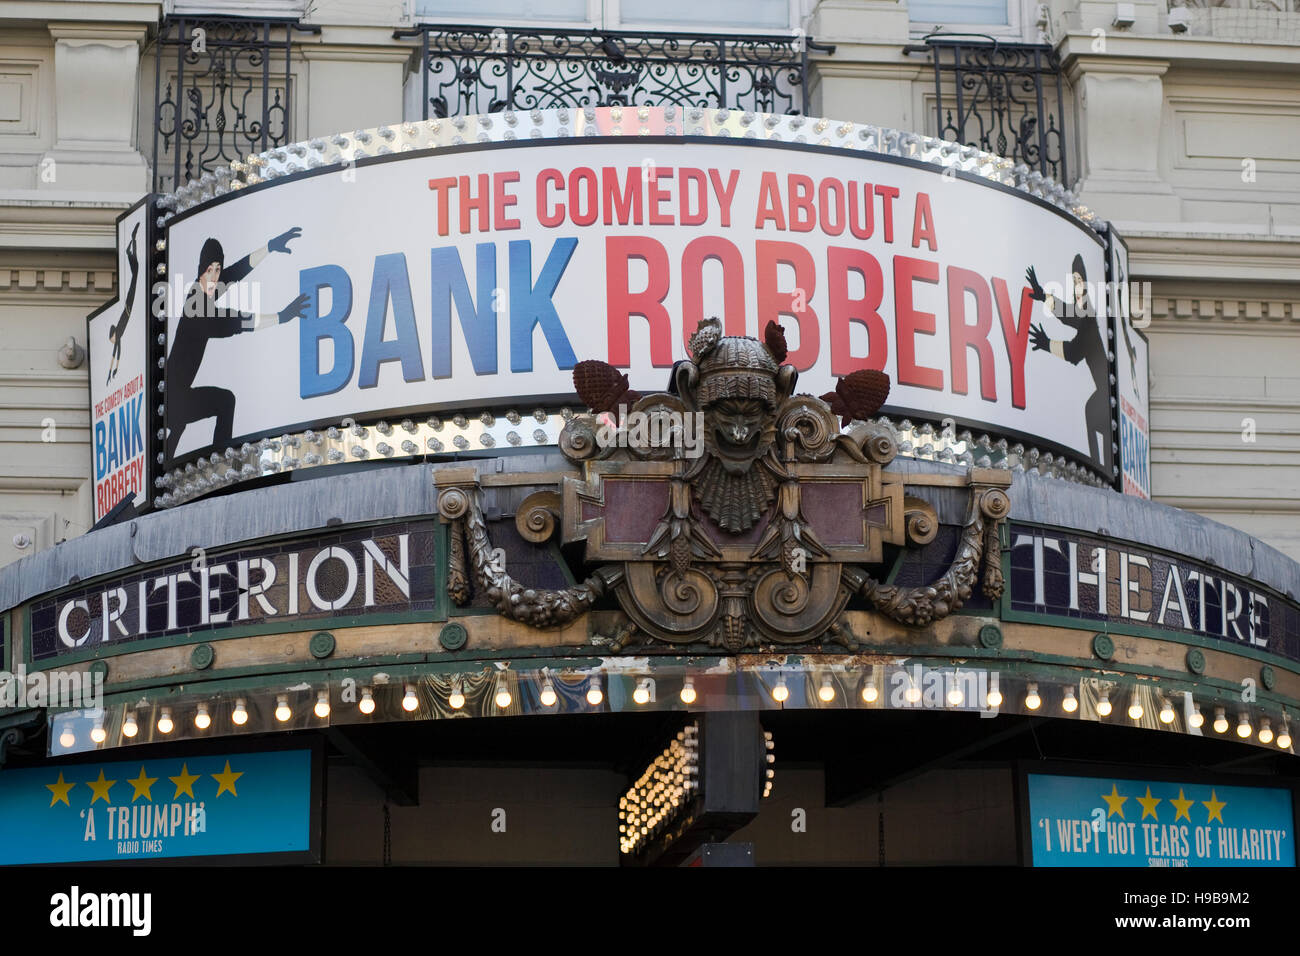 The Comedy About A Bank Robbery - Criterion Theatre, London Stock Photo